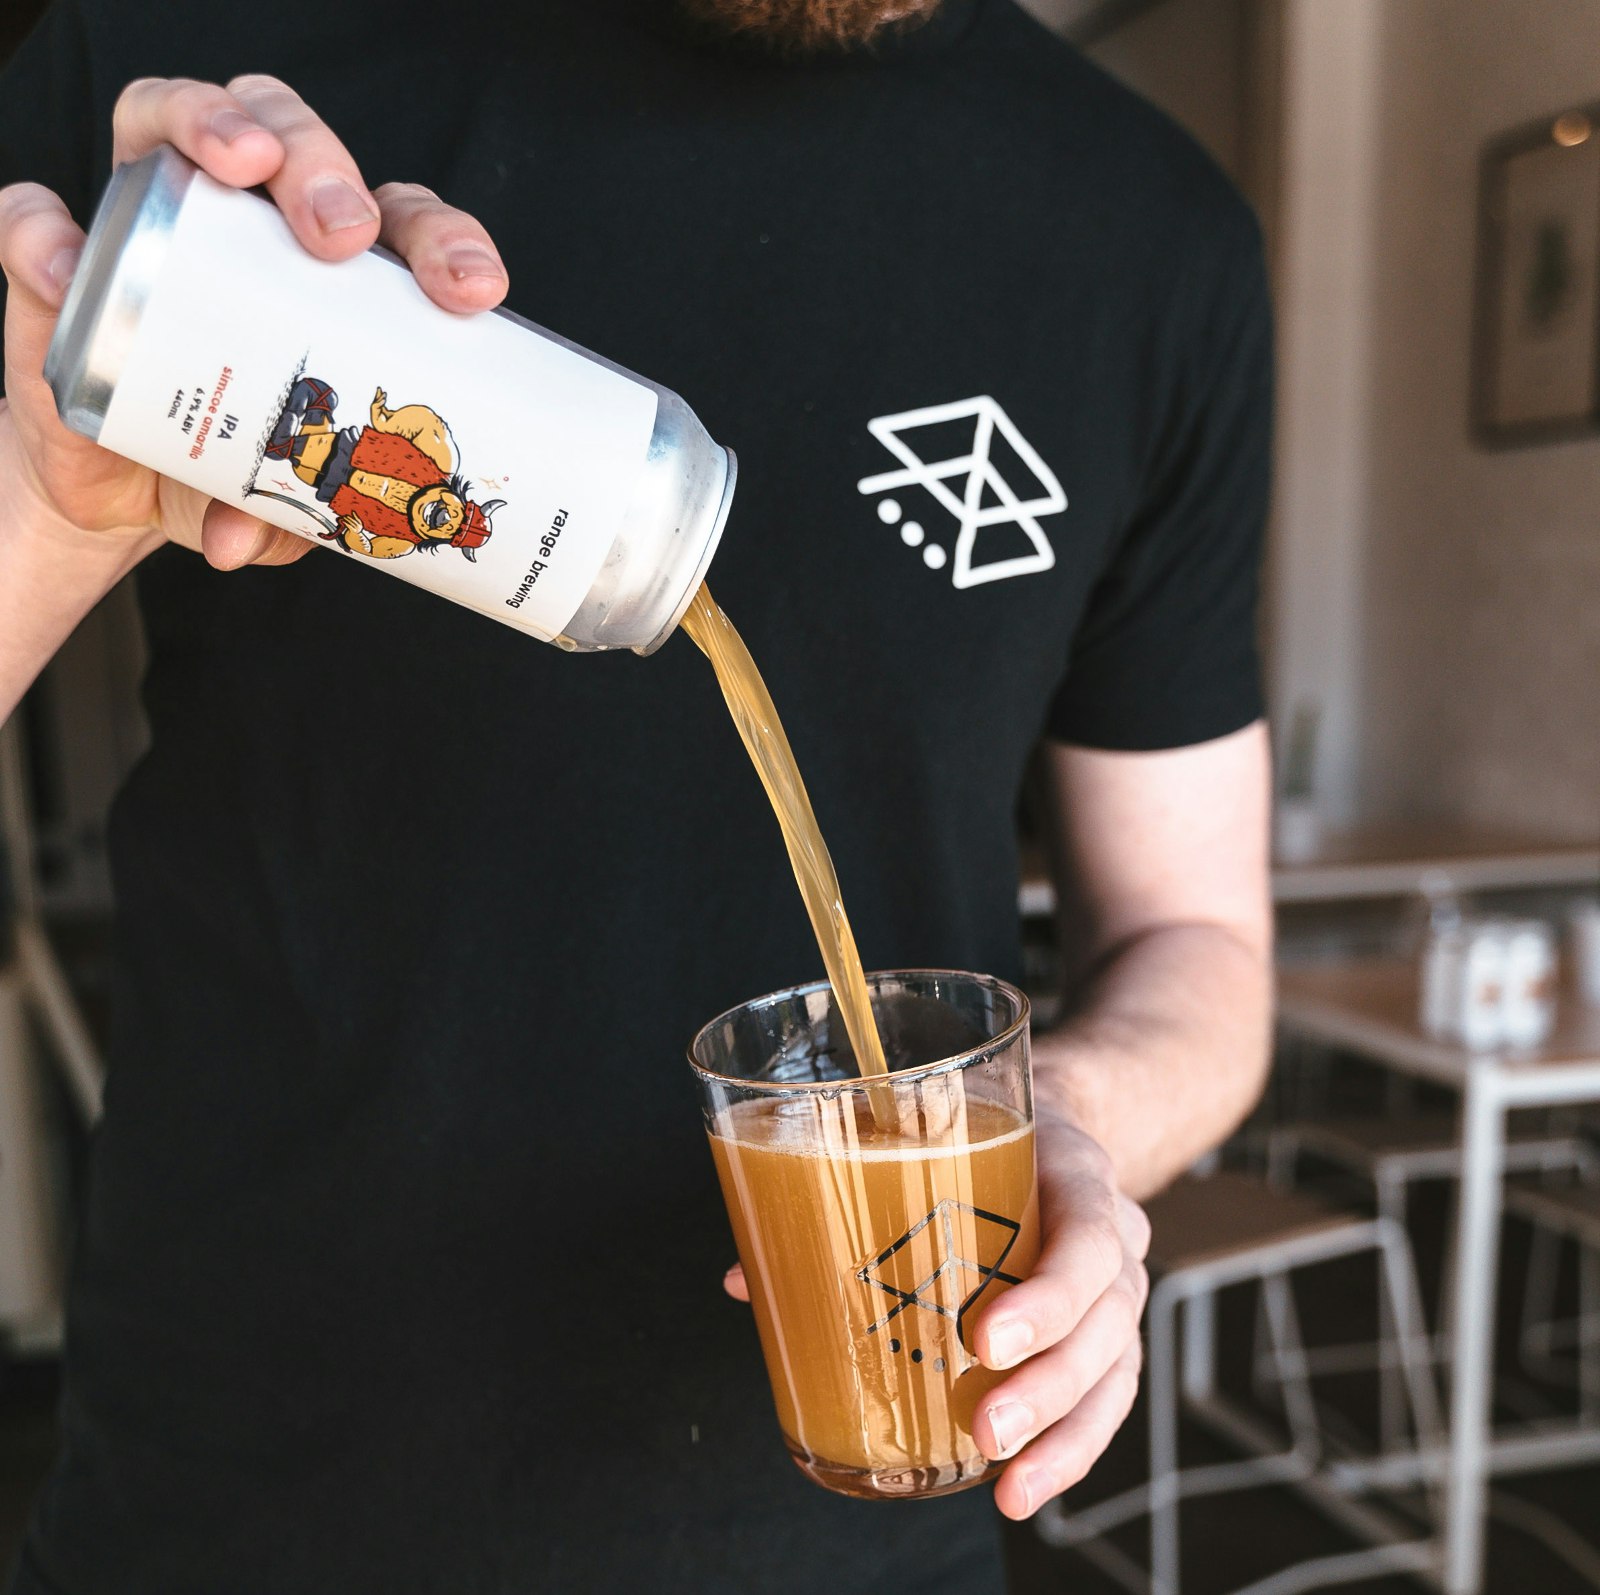 A honey-coloured beer is poured is poured into a pint glass by a man wearing a black Range Brewing t-shirt.